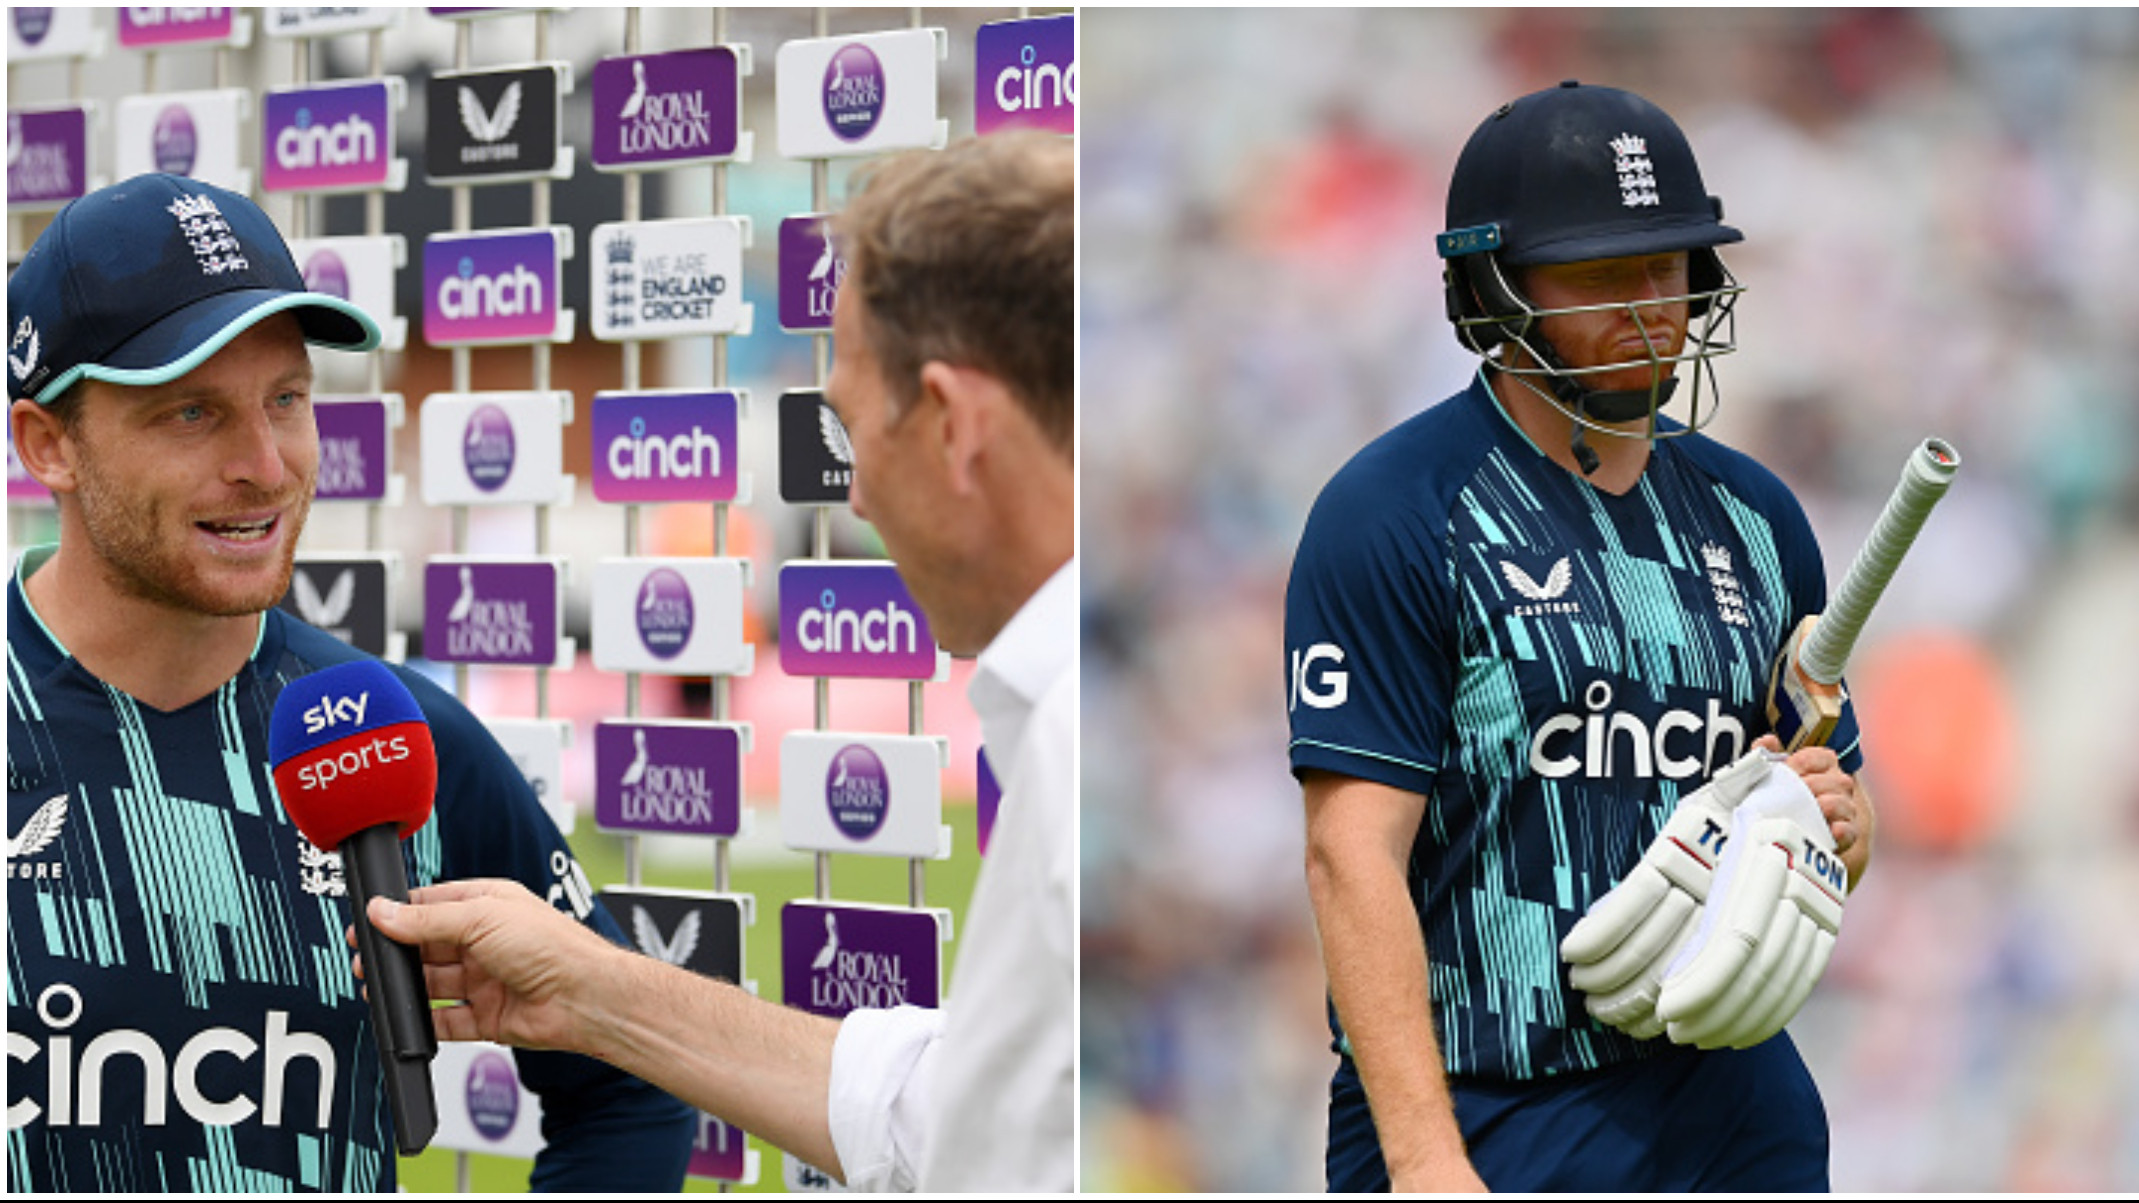 ENG v IND 2022: “Guys in form of their lives in Tests getting nicked off,” Jos Buttler after huge loss in 1st ODI